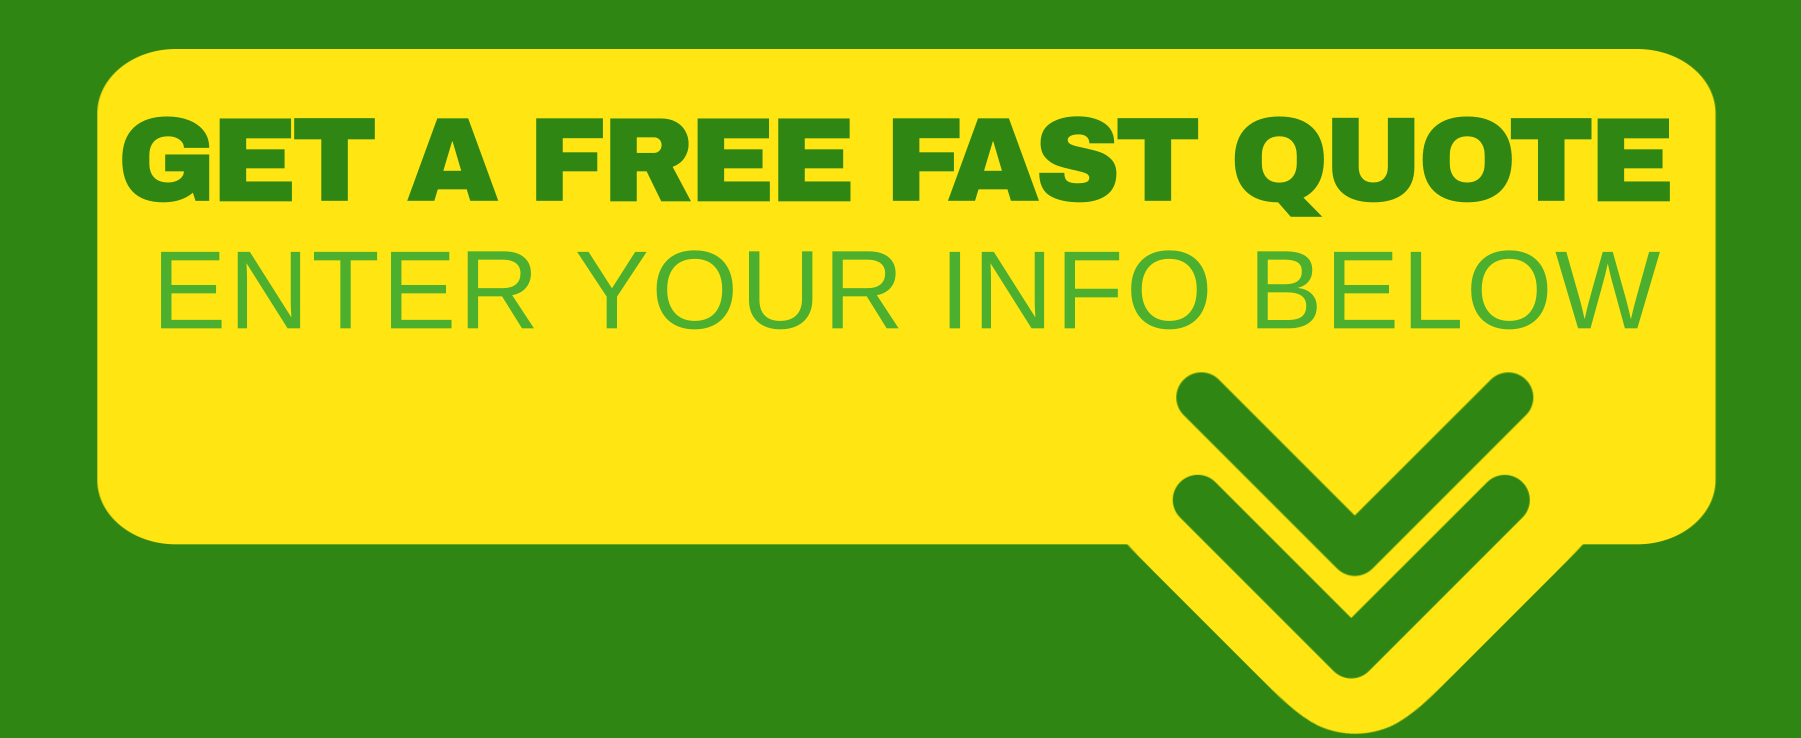 banner for a fast free quote over a contact form